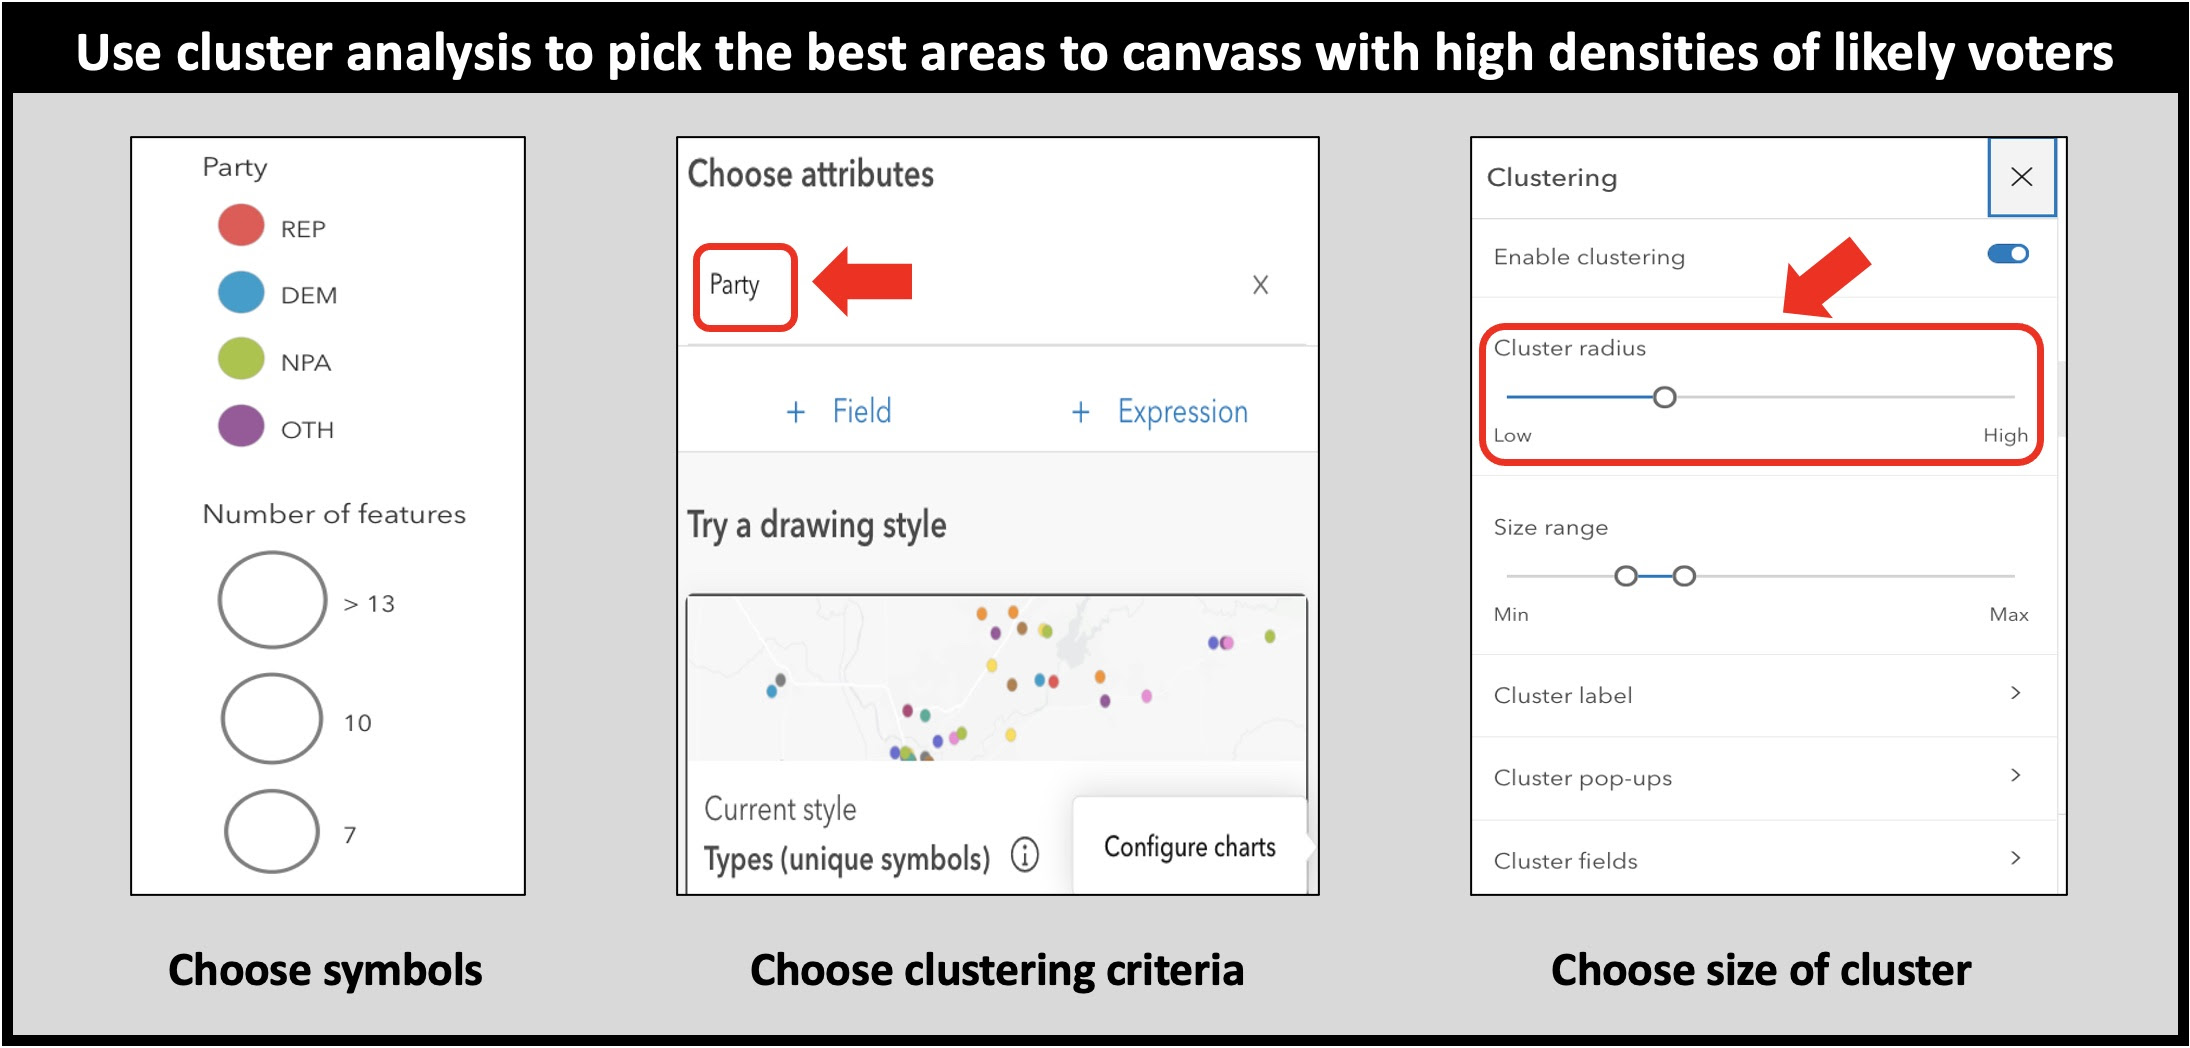 Use cluster analysis to find the best areas to canvass with high densities of likely voters.